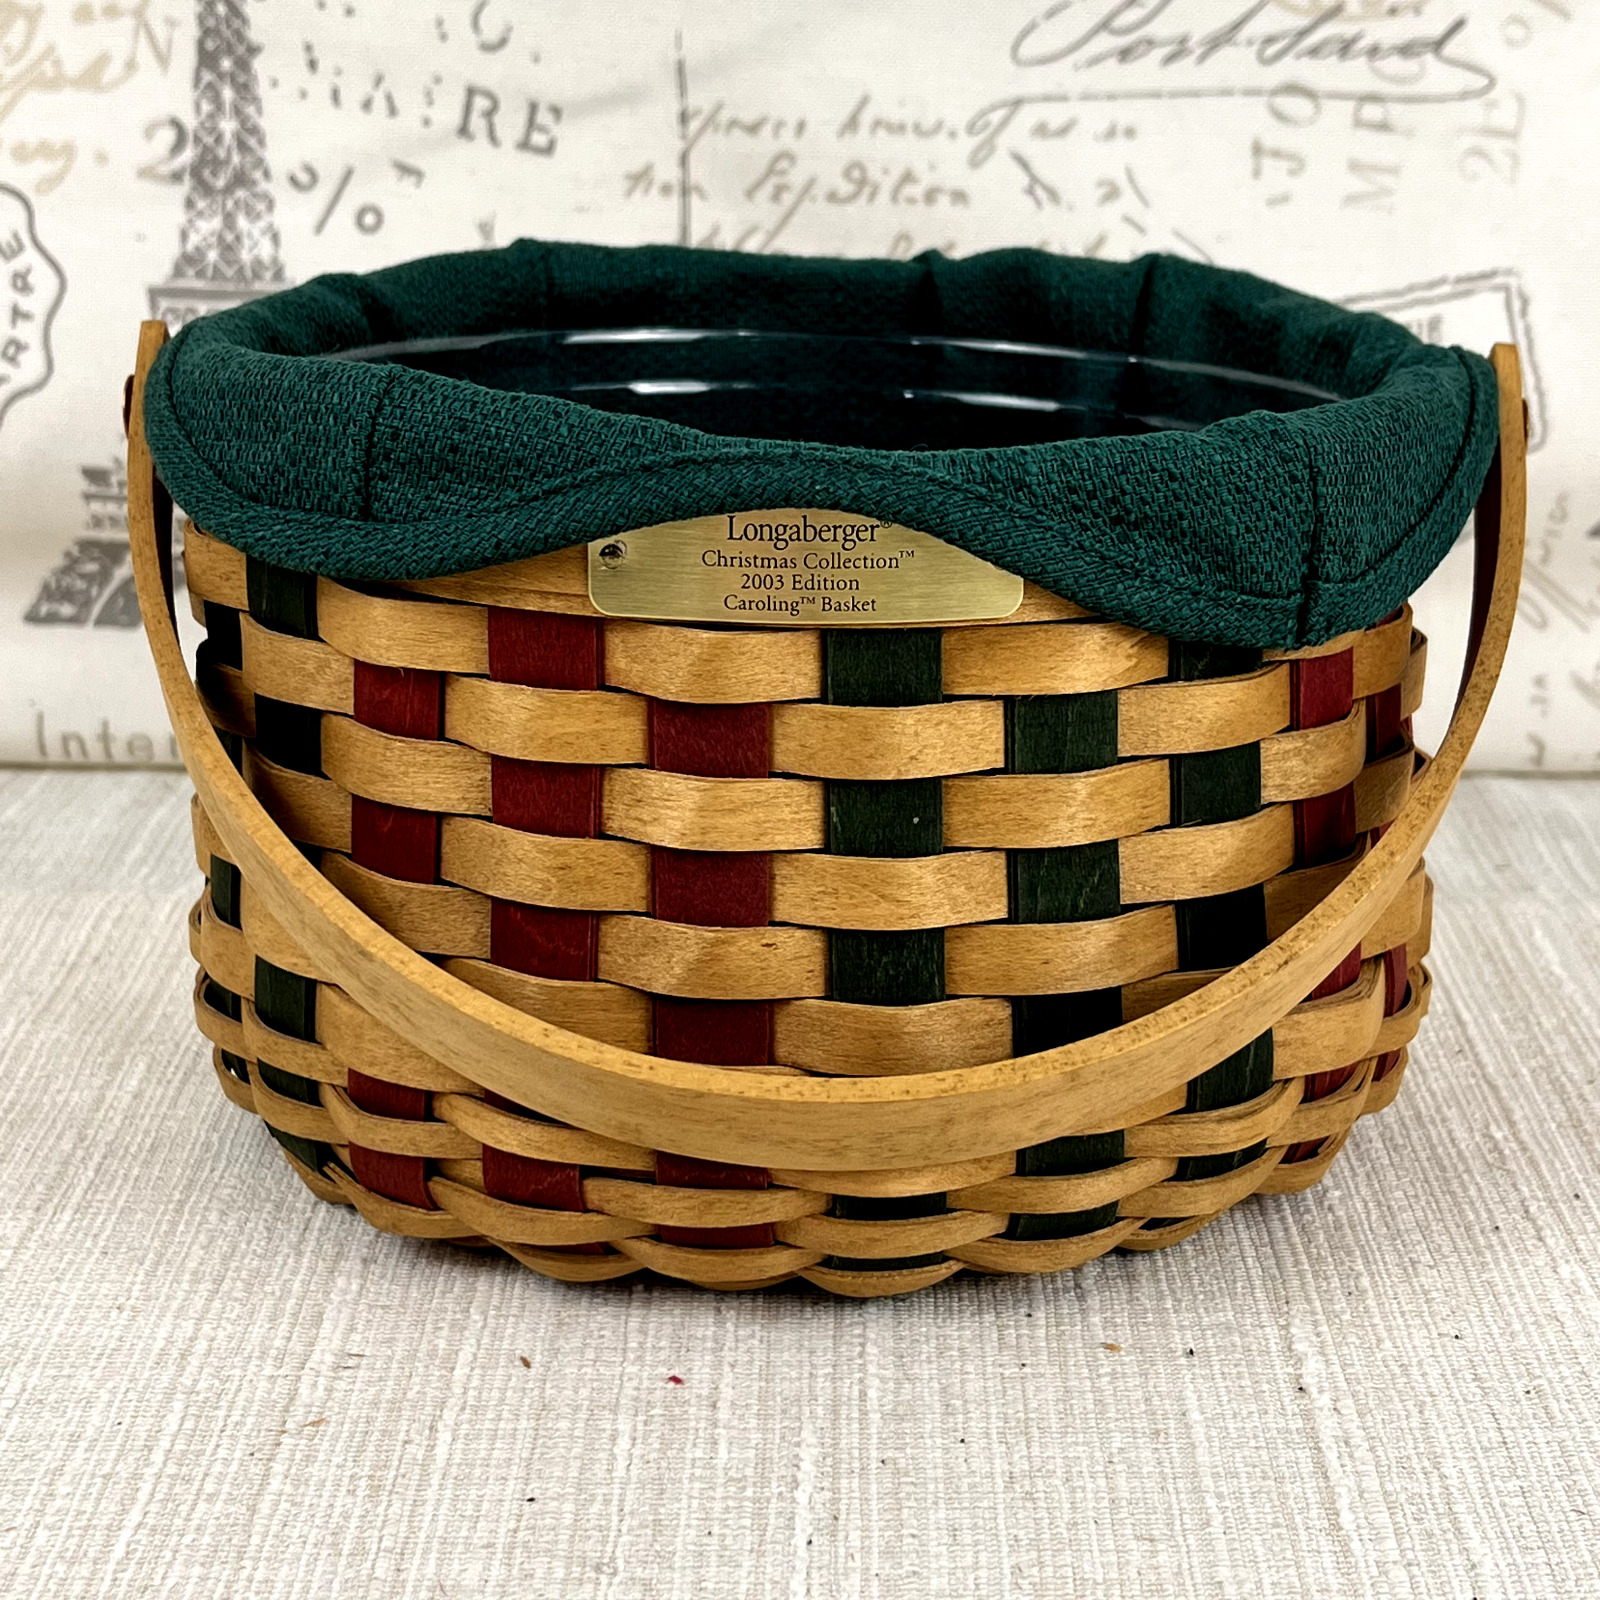 Longaberger 2003 Christmas Collection Caroling Basket with Liner and Protector